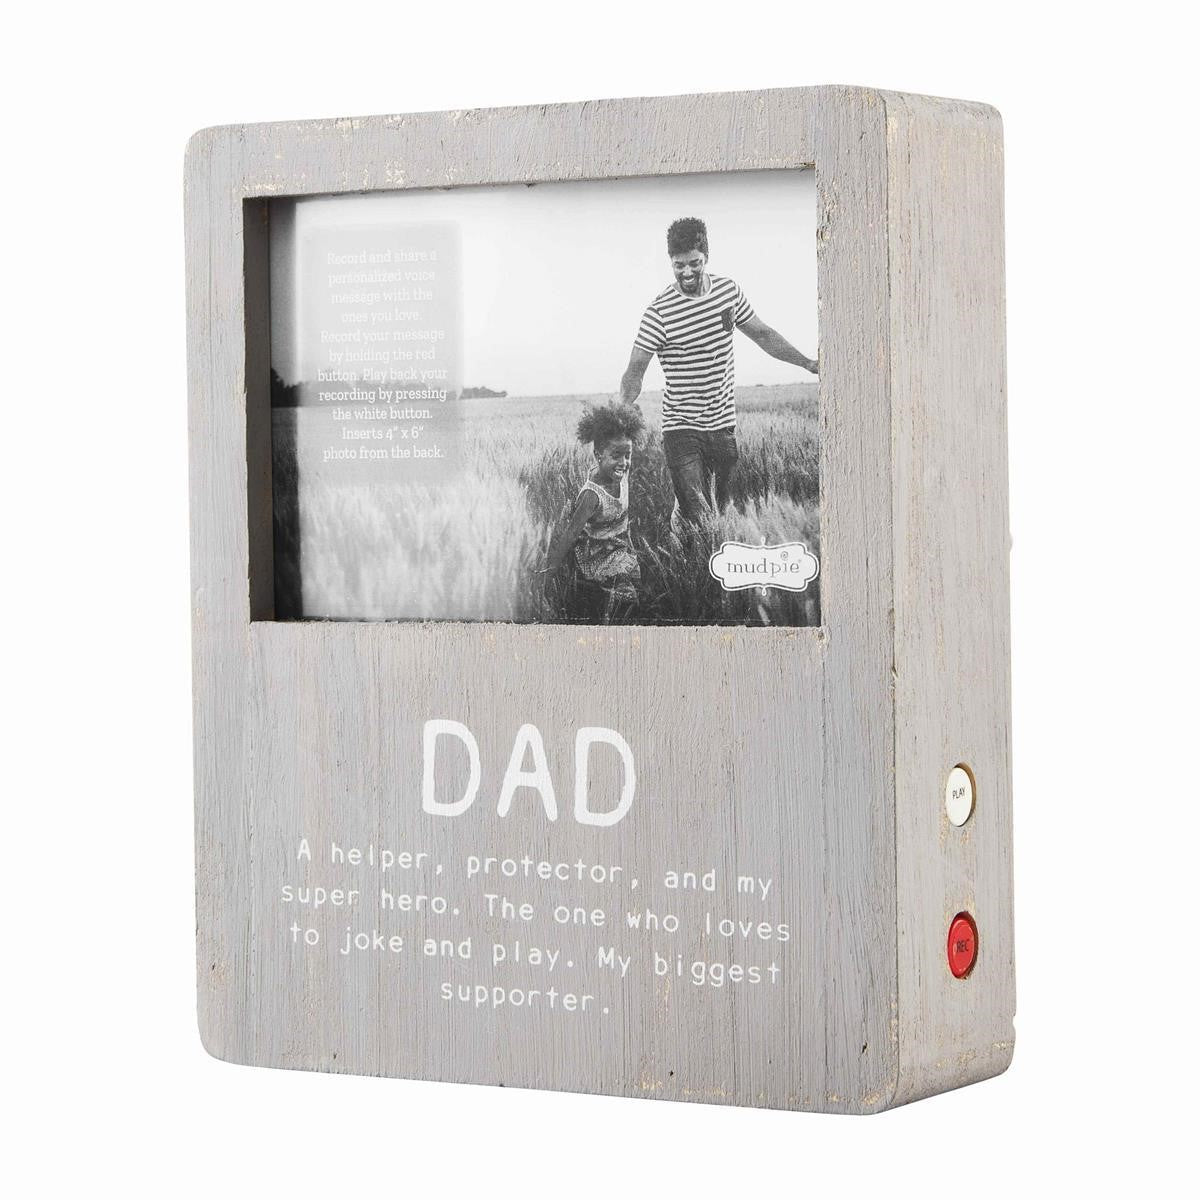 Picture of Dad Voice Recorder Frame